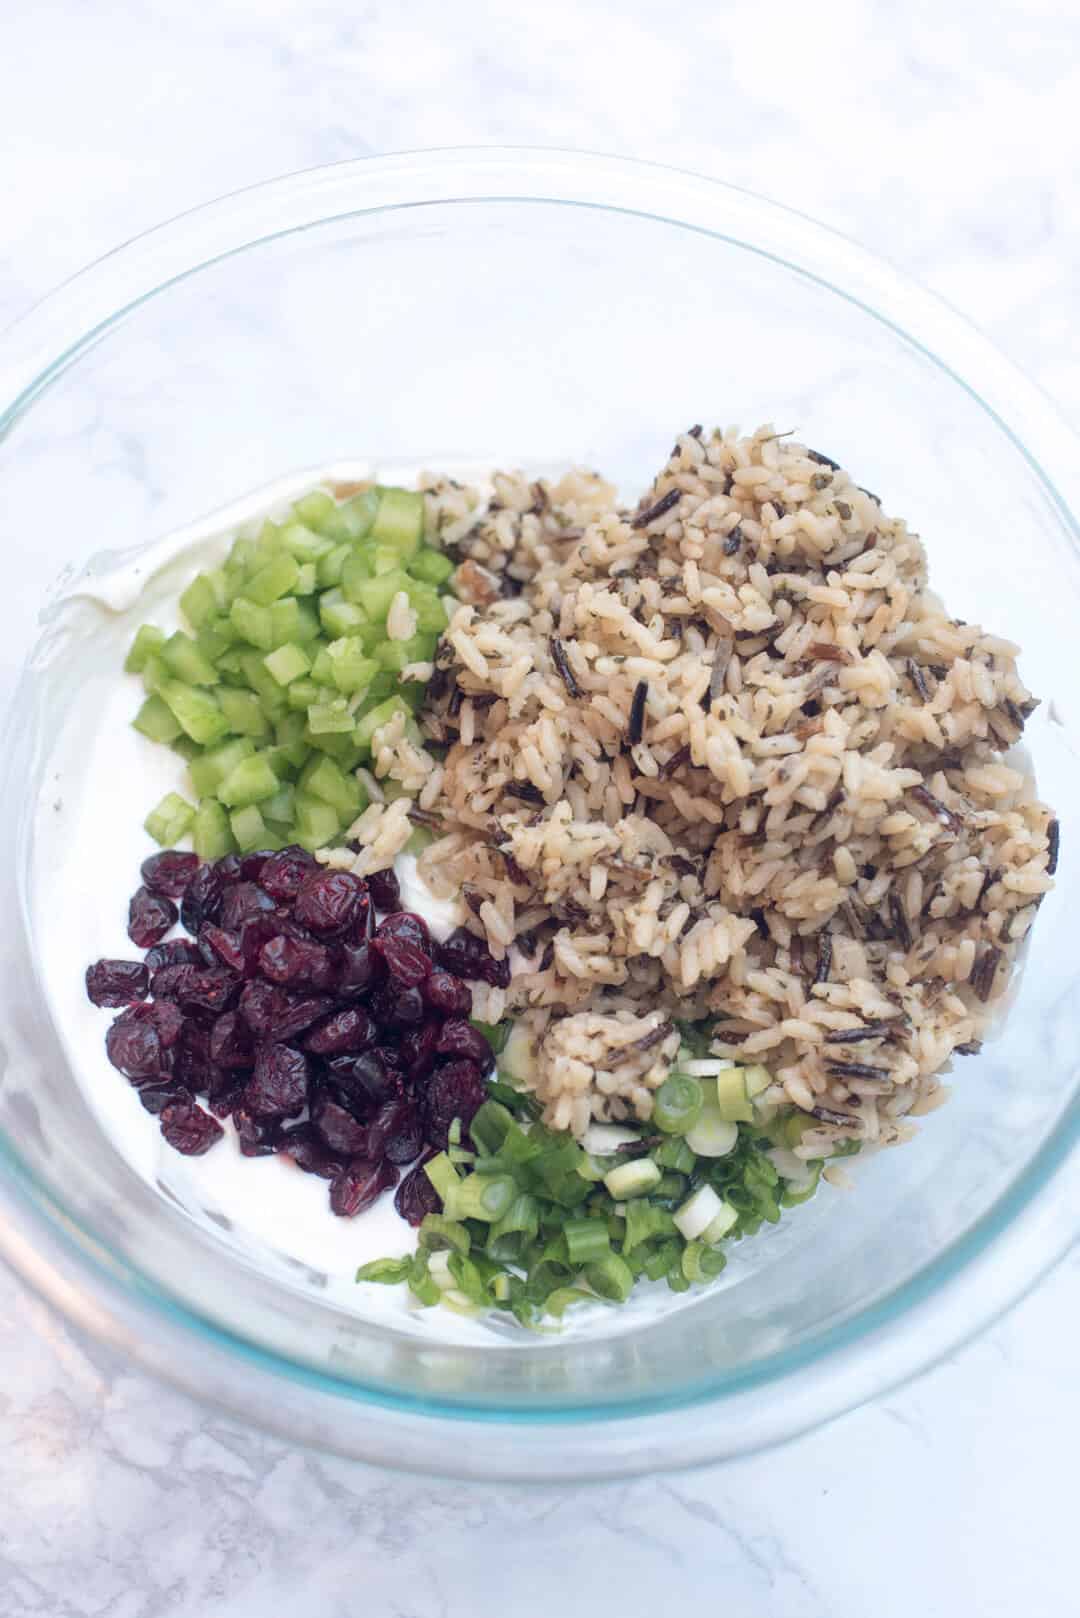 Wild rice, celery, craisins  and other ingredients in a glass bowl.